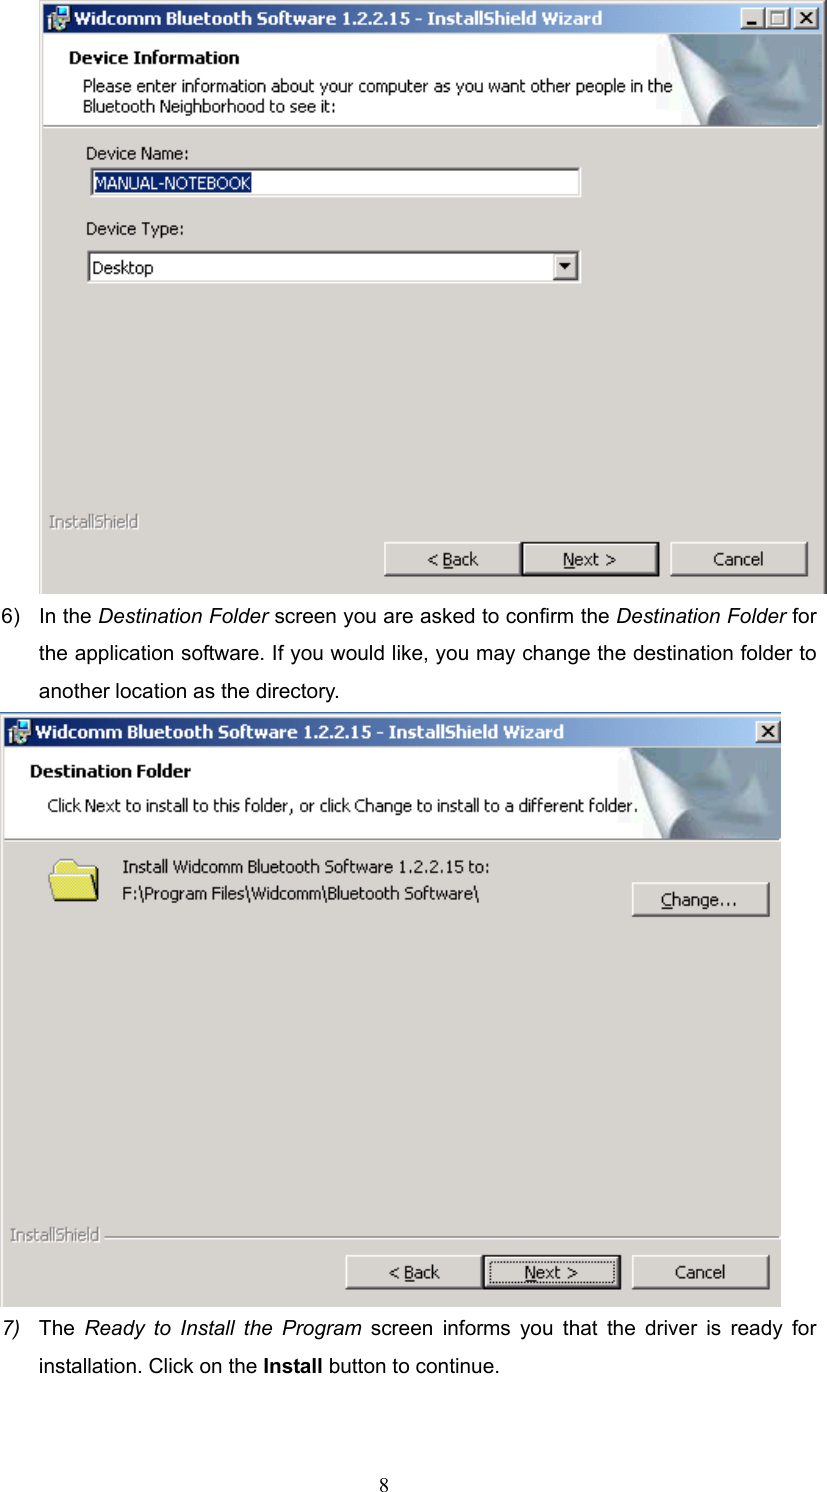  8  6) In the Destination Folder screen you are asked to confirm the Destination Folder for the application software. If you would like, you may change the destination folder to another location as the directory.  7)  The Ready to Install the Program screen informs you that the driver is ready for installation. Click on the Install button to continue.   